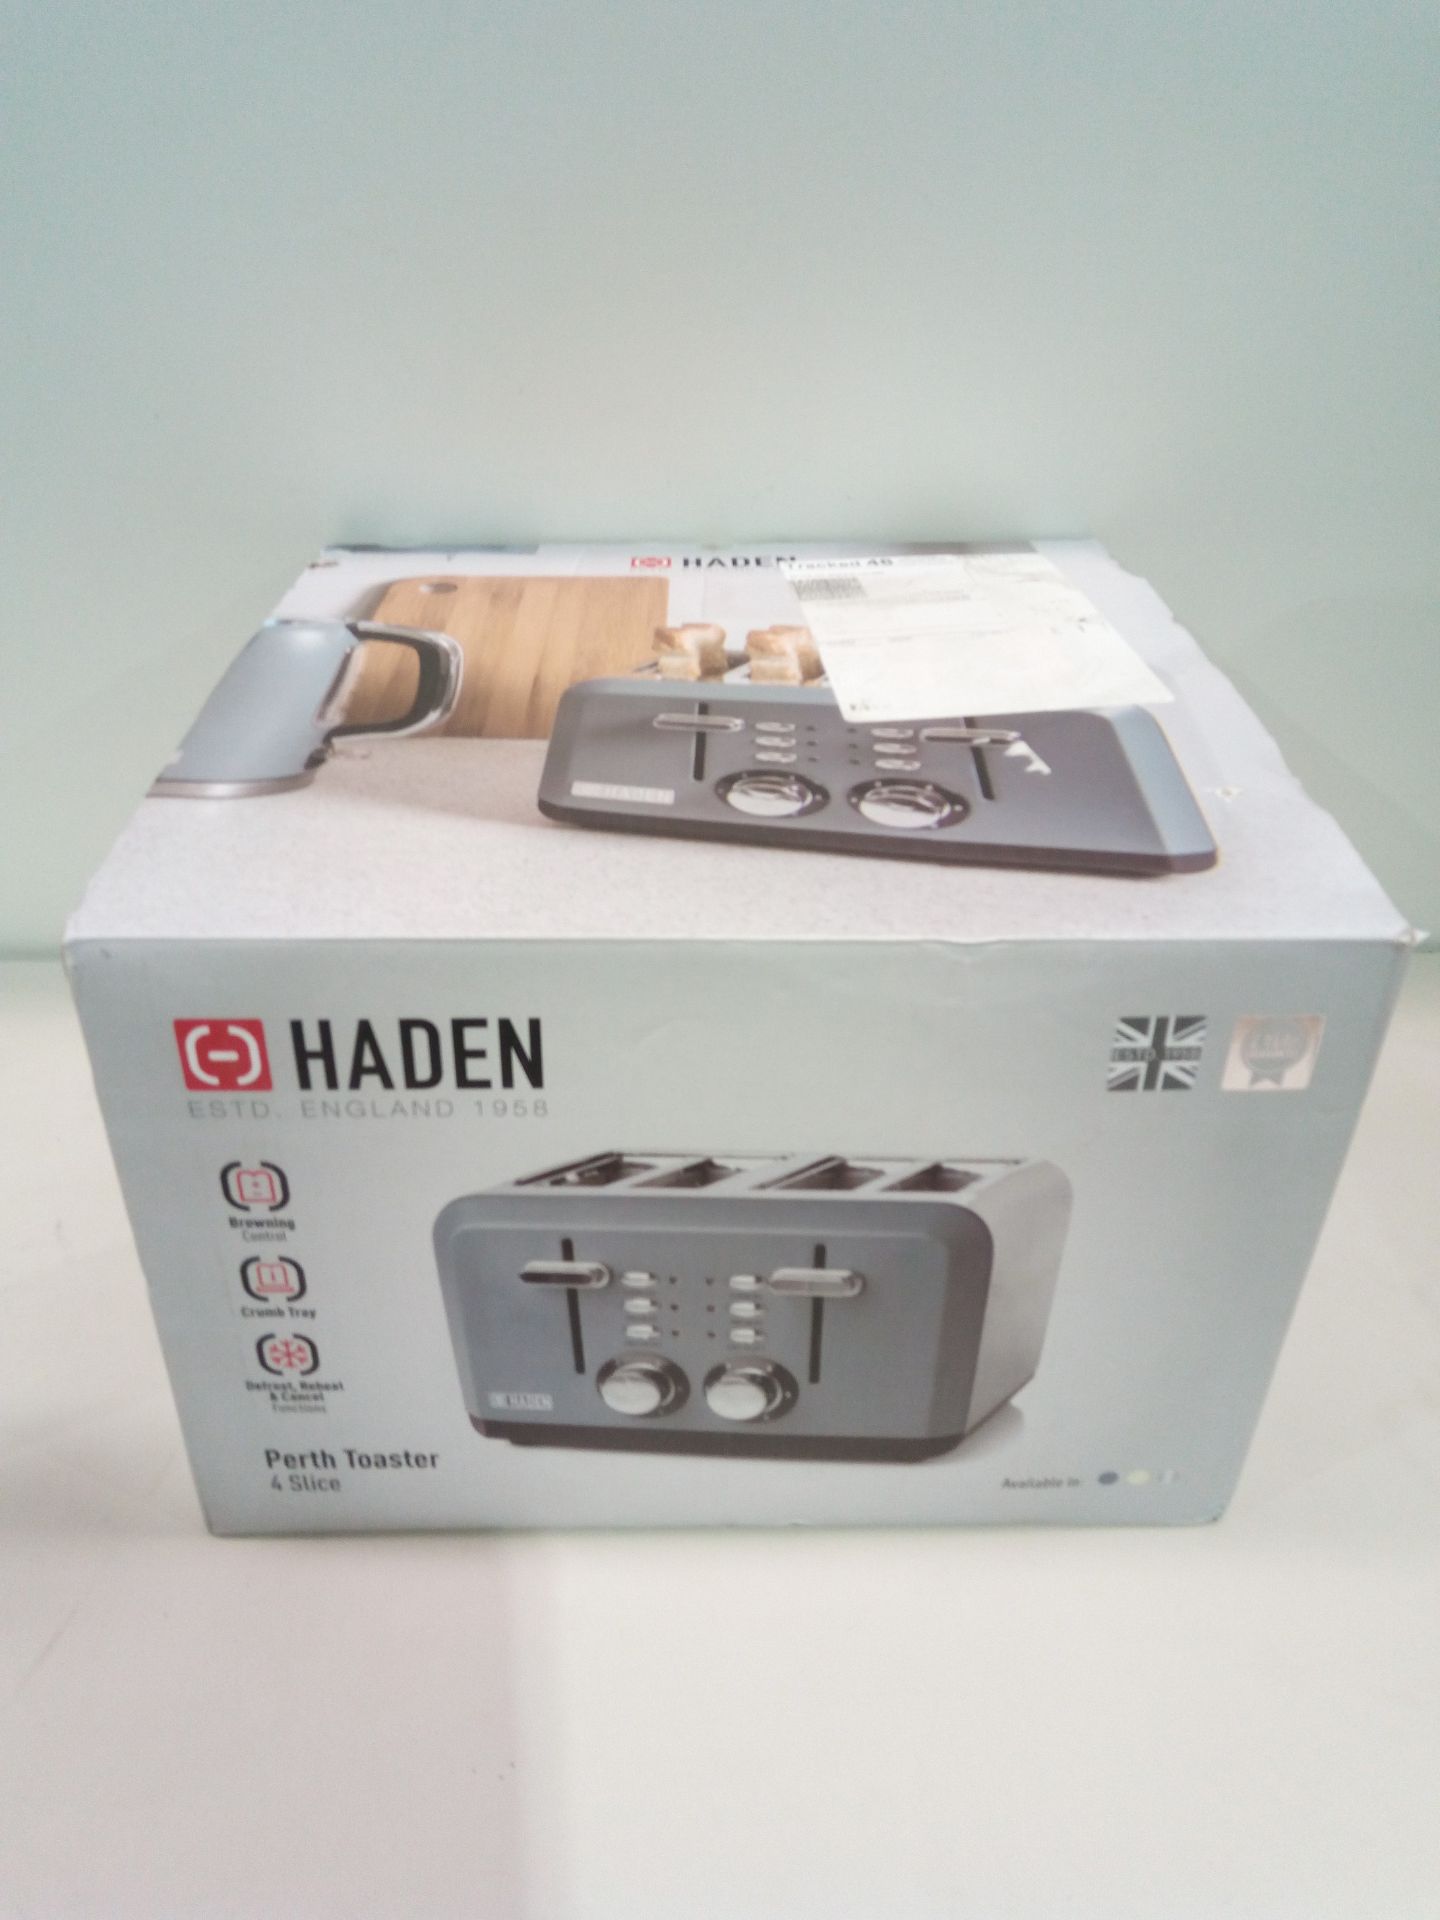 RRP £36.00 Haden Perth Toaster - Image 2 of 2